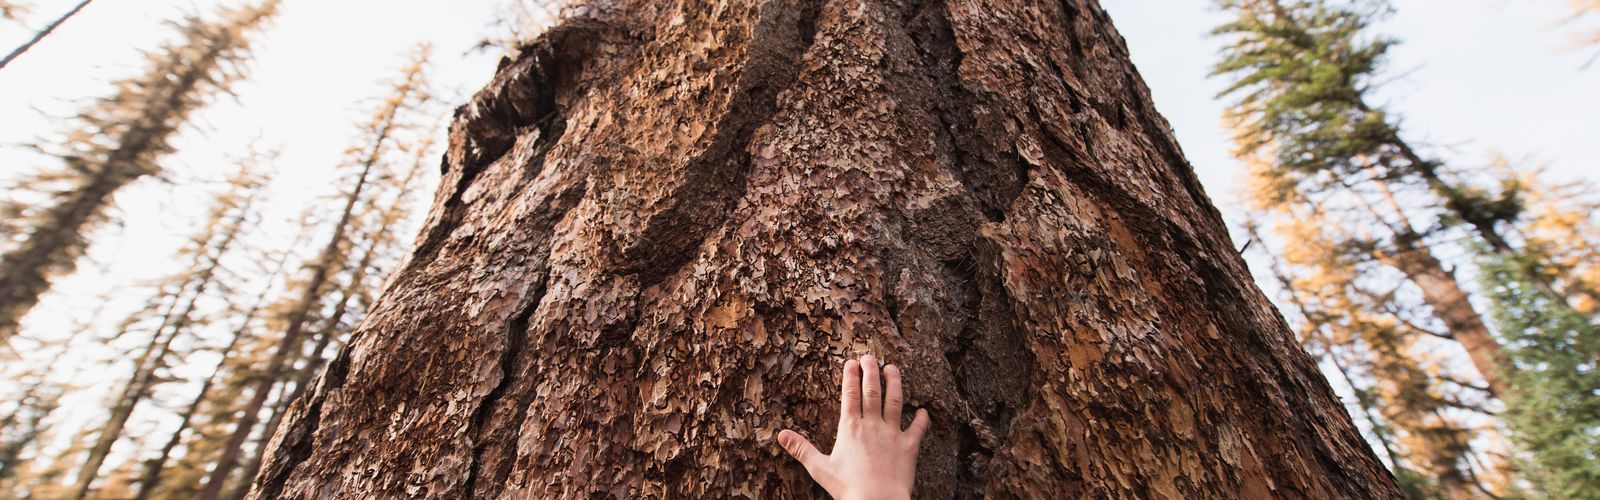 Child's hand touches wide trunk of towering tree.